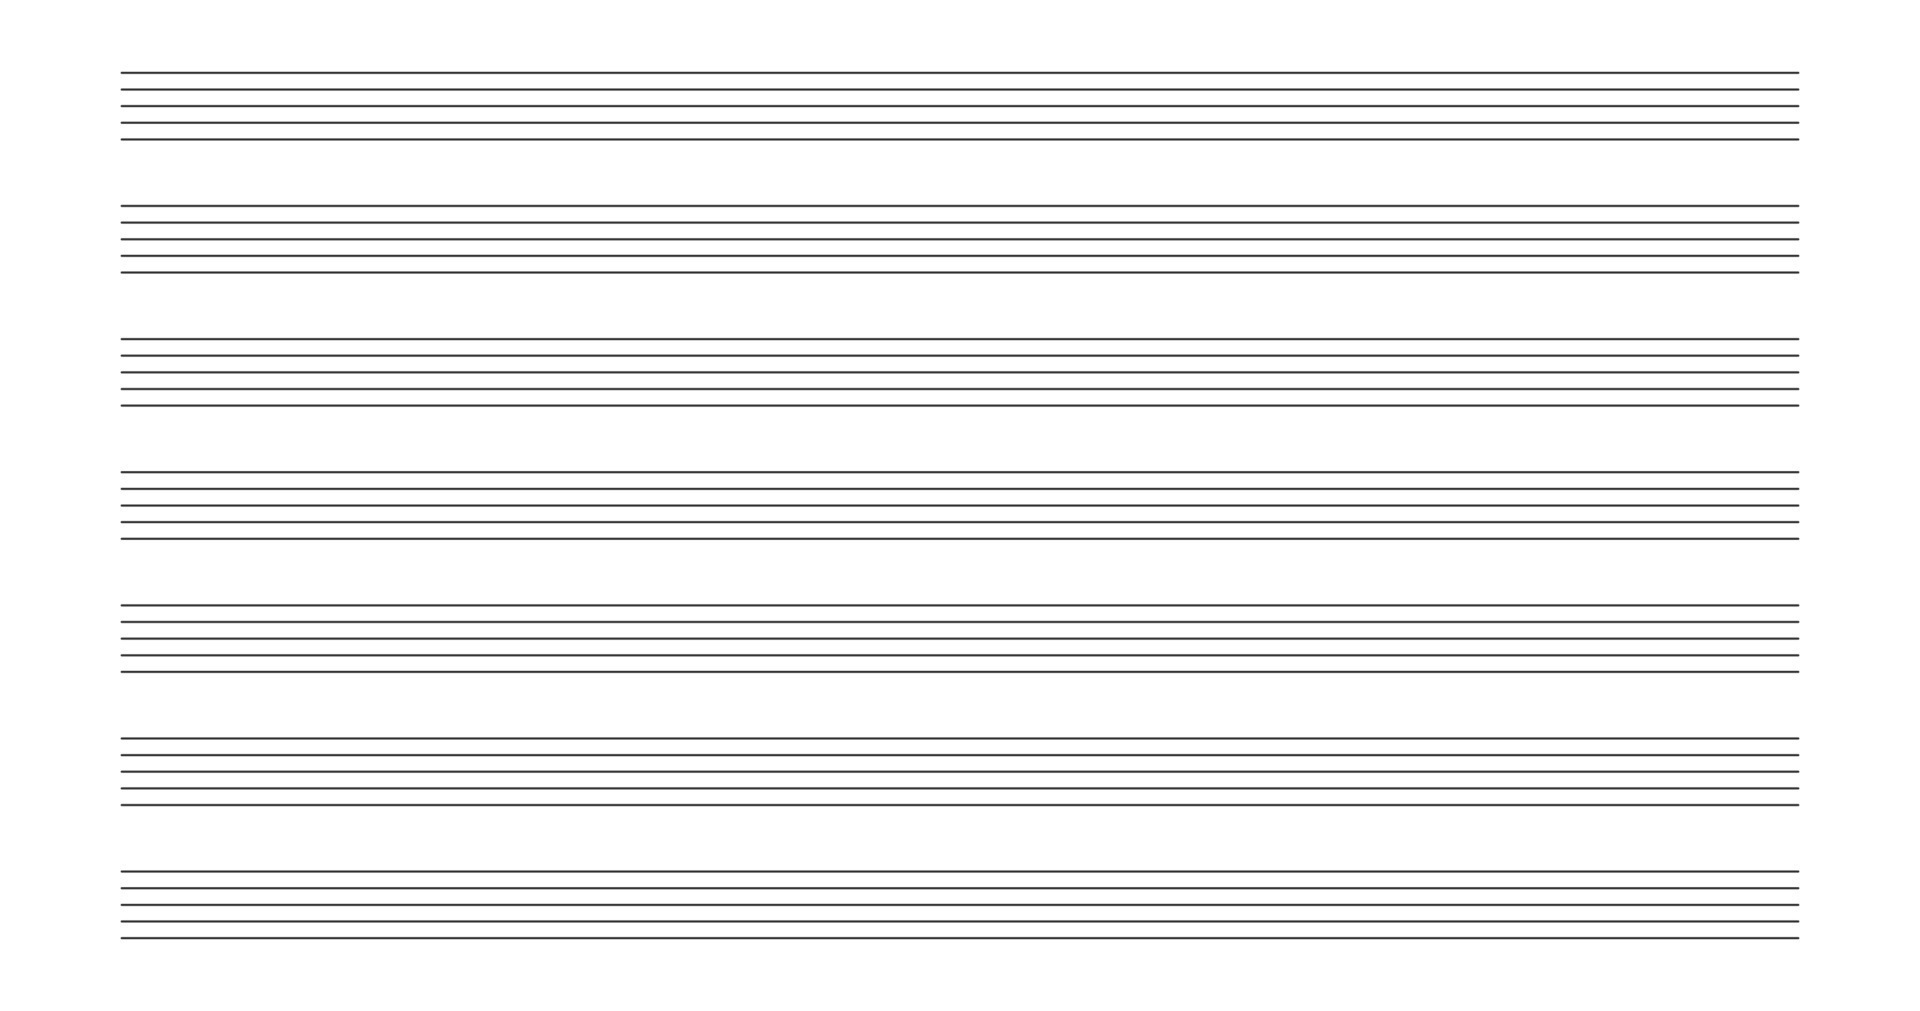 https://static.vecteezy.com/system/resources/previews/014/623/836/original/music-blank-note-stave-blank-classical-music-paper-sheet-for-school-note-book-line-grid-for-melody-and-songs-illustration-isolated-on-white-background-vector.jpg